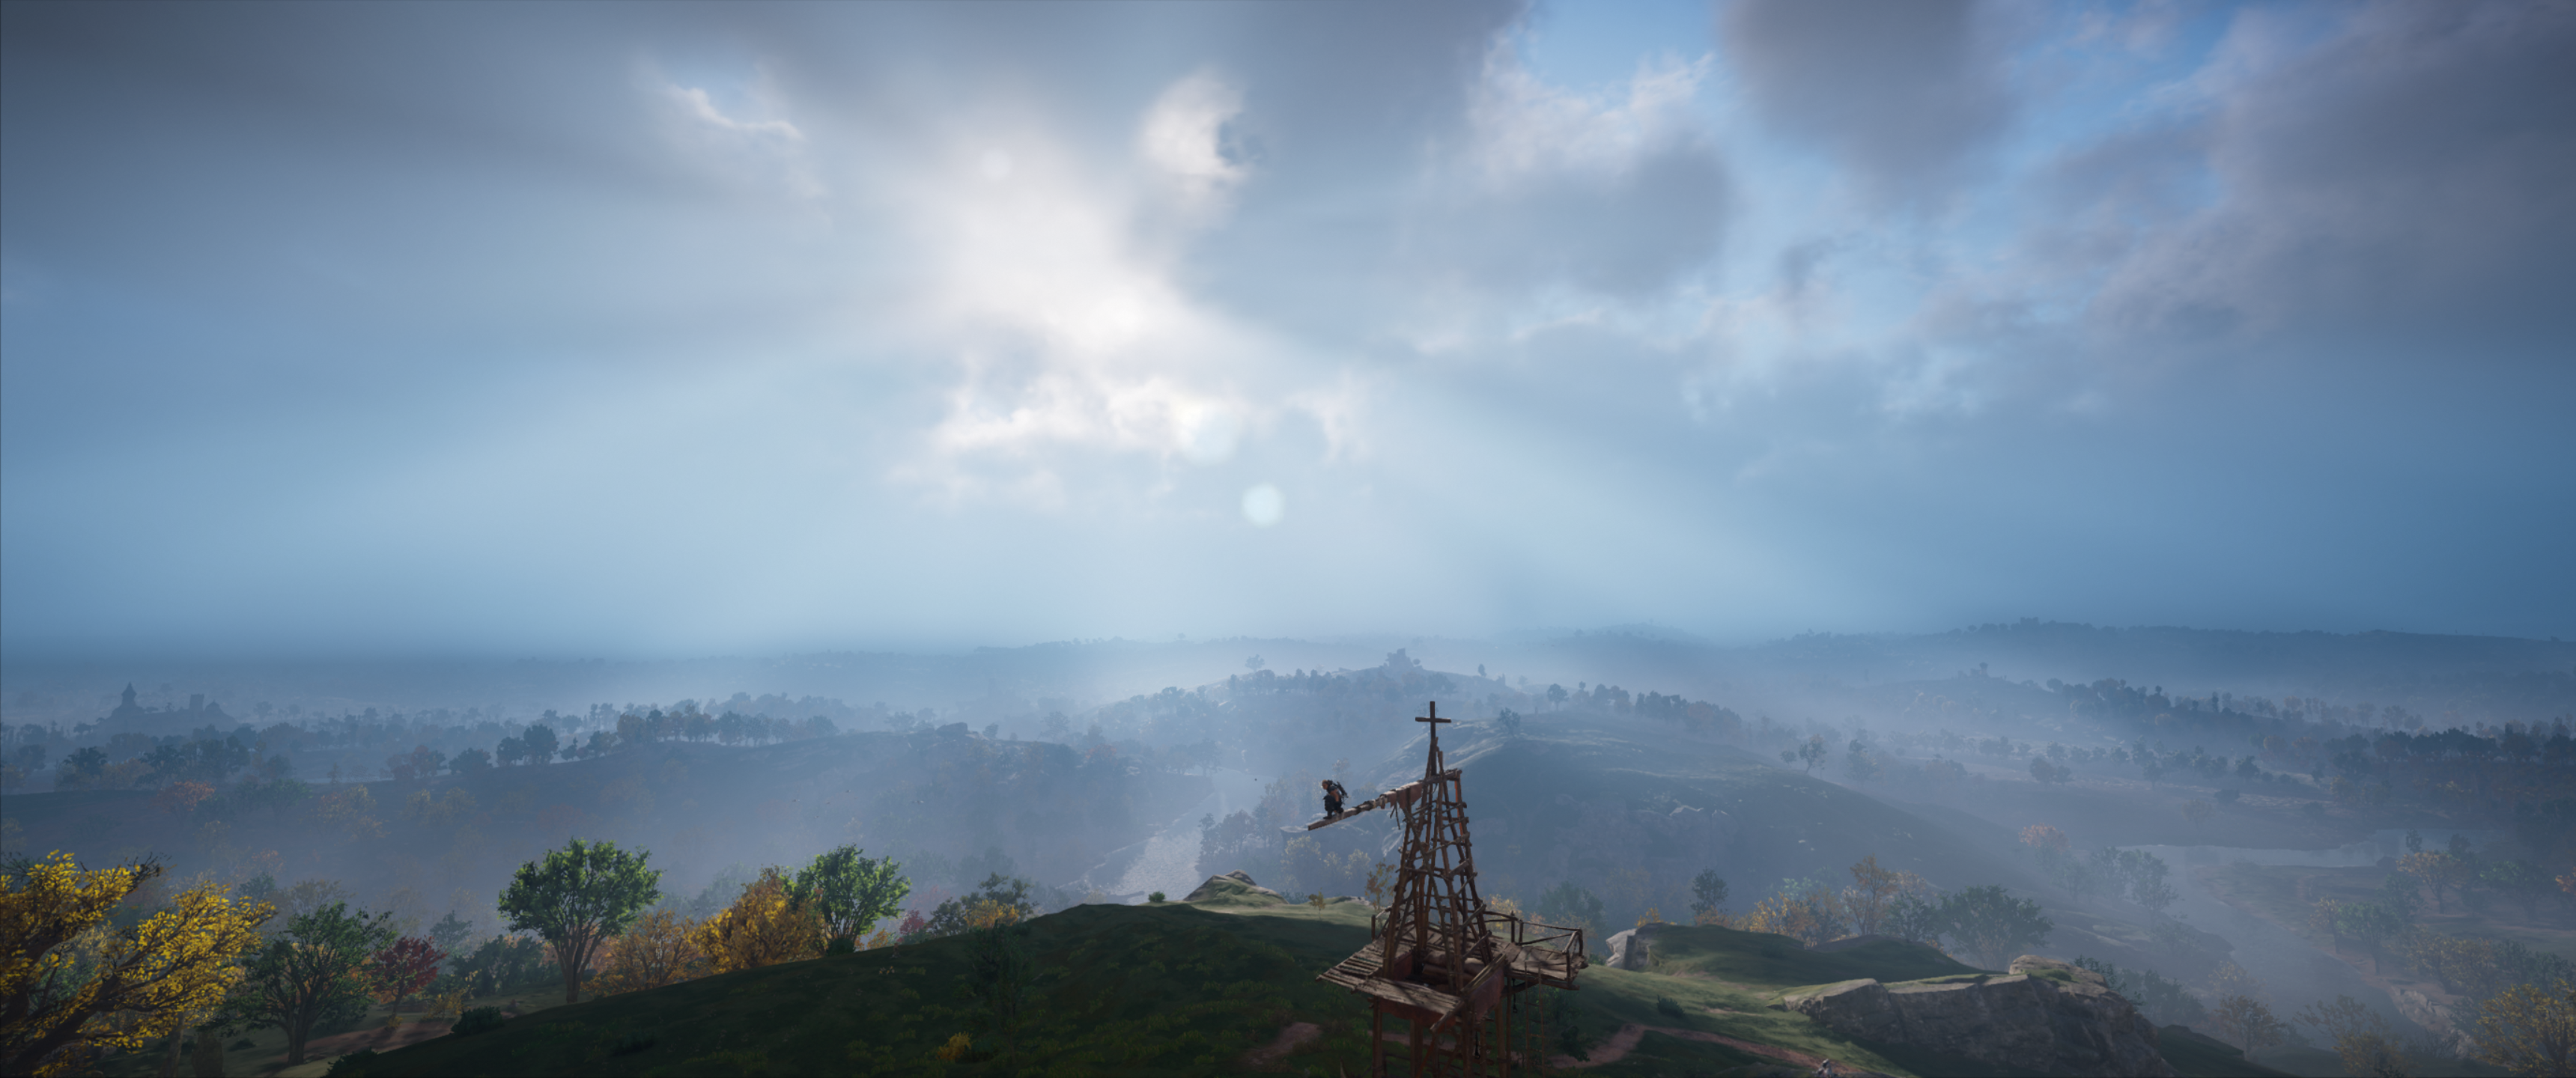 General 3440x1440 Assassin's Creed Assassin's Creed: Valhalla landscape clouds Sun structure blue trees green yellow